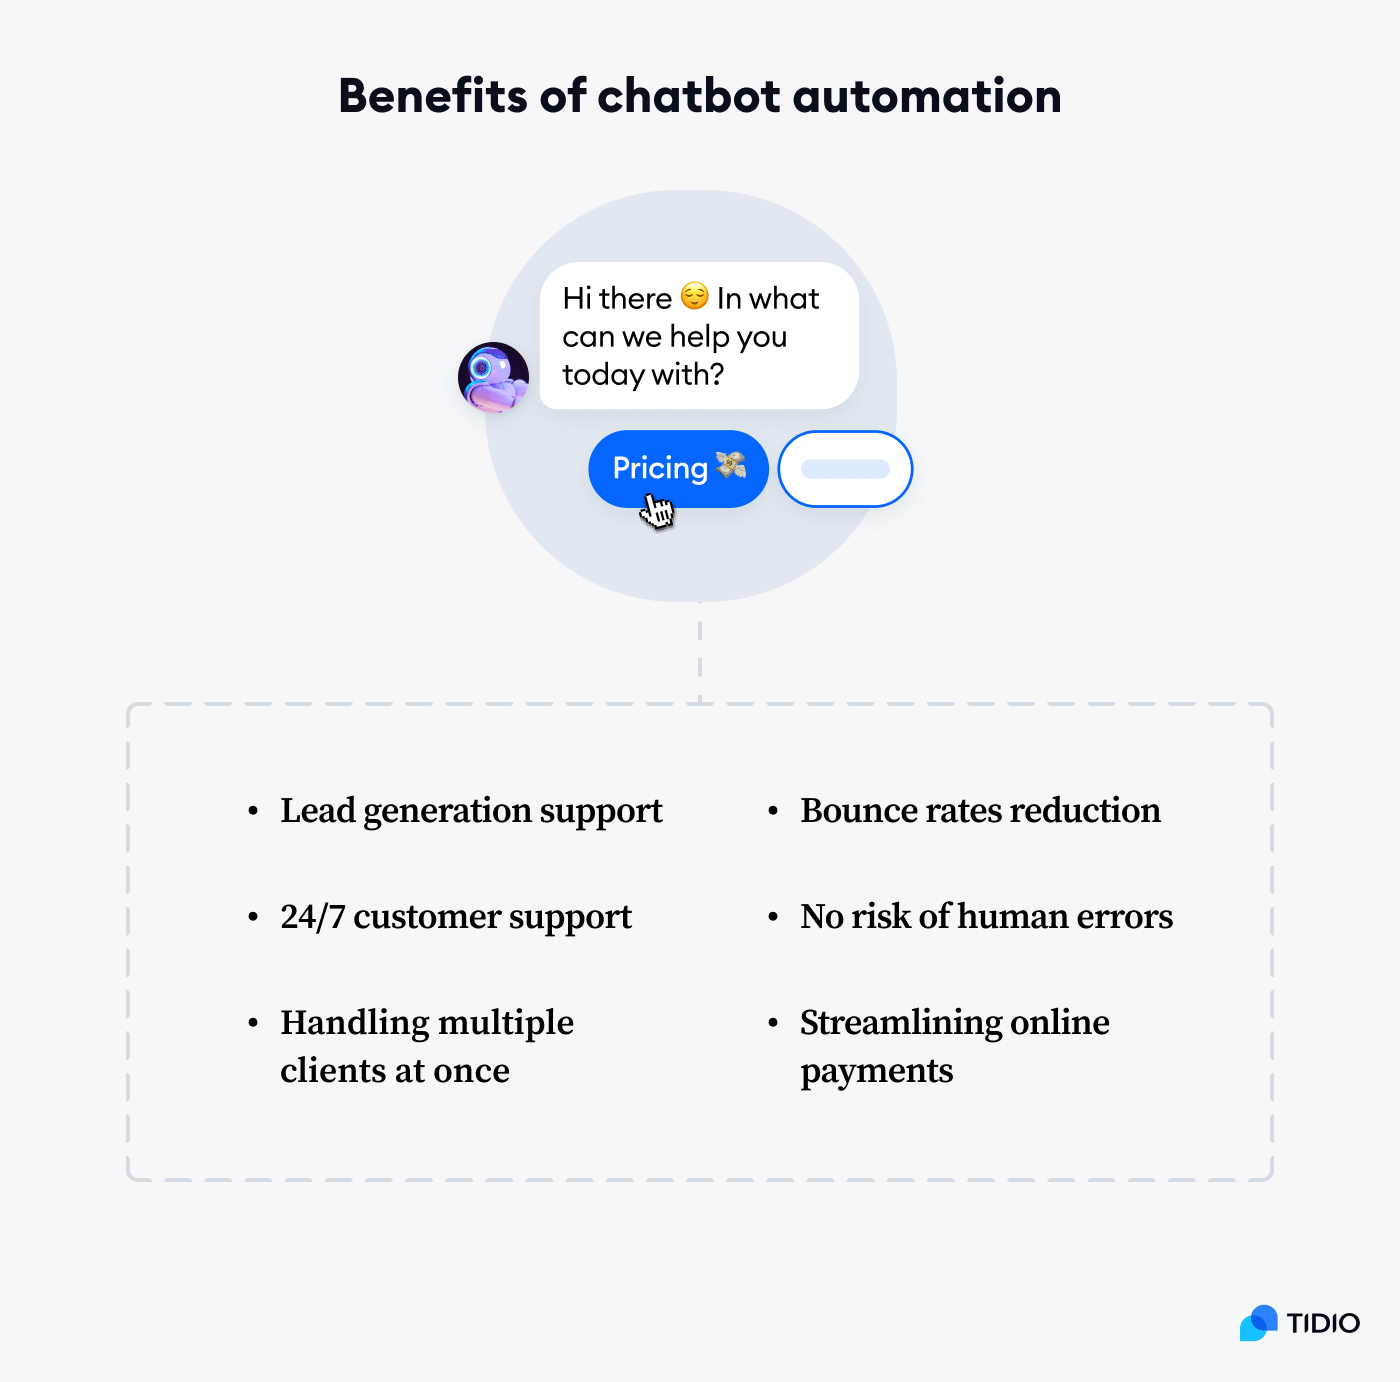 Benefits of chatbot automation